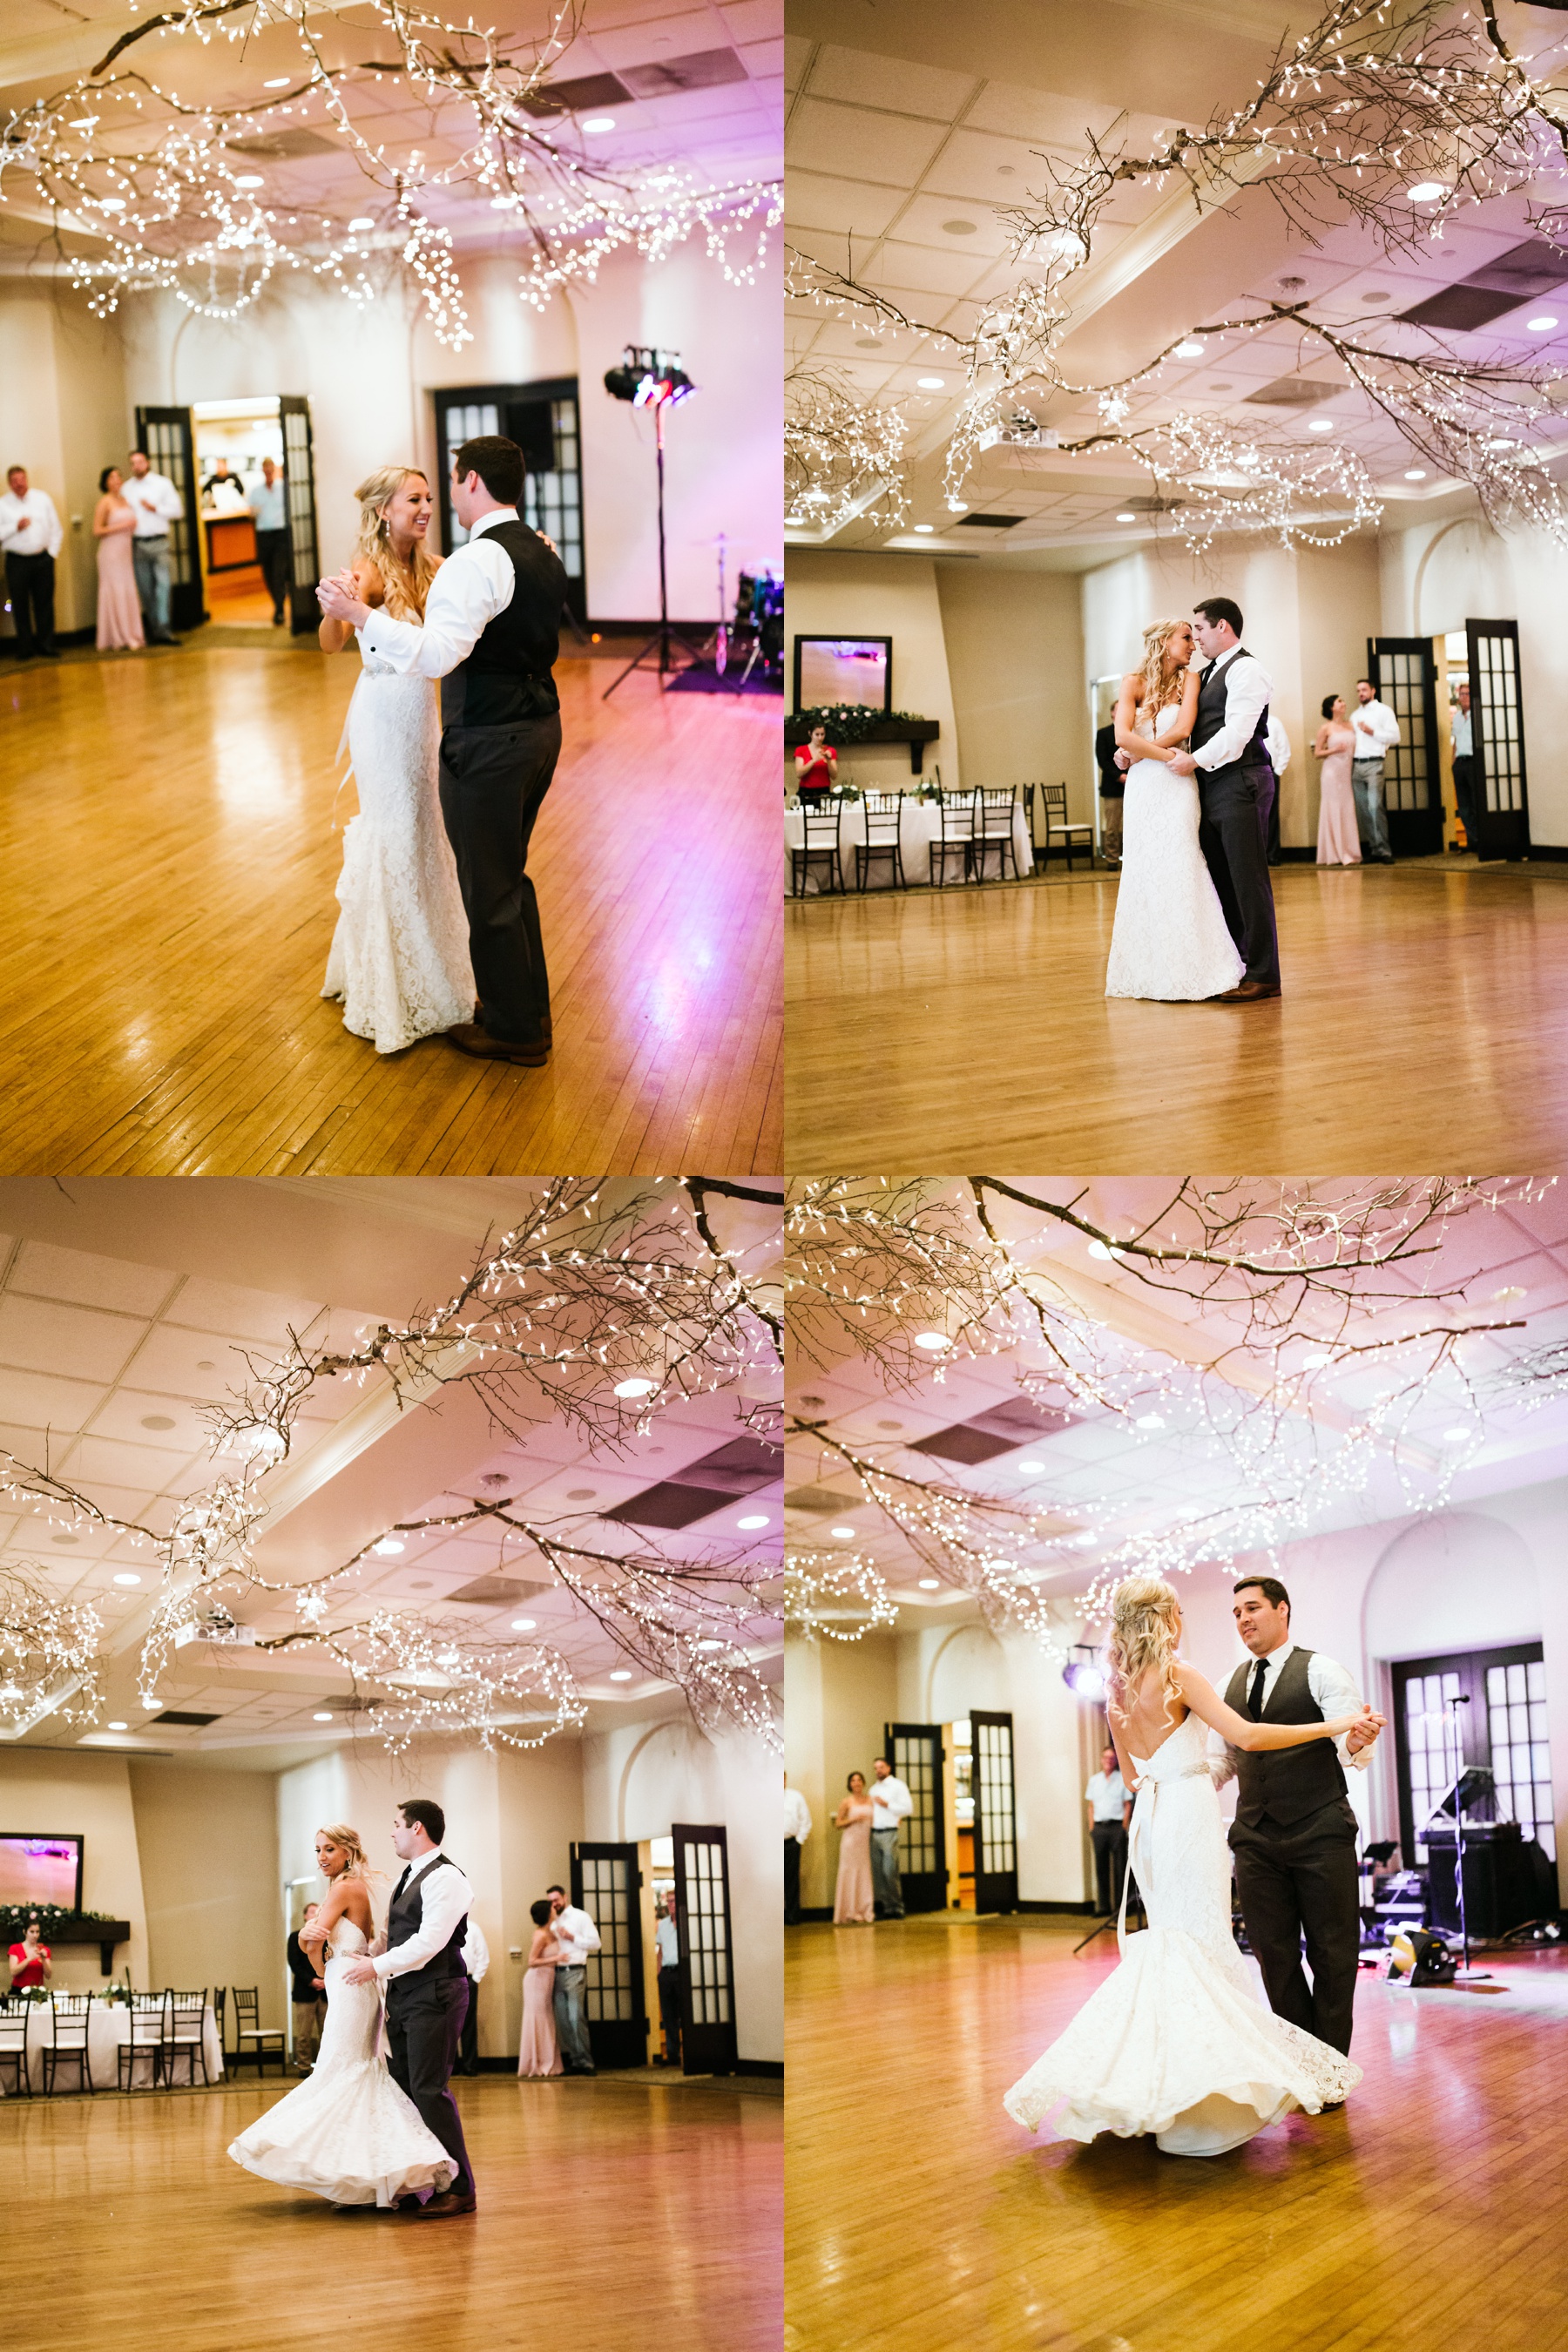 A couple sharing their first dance at their spring lake country club wedding